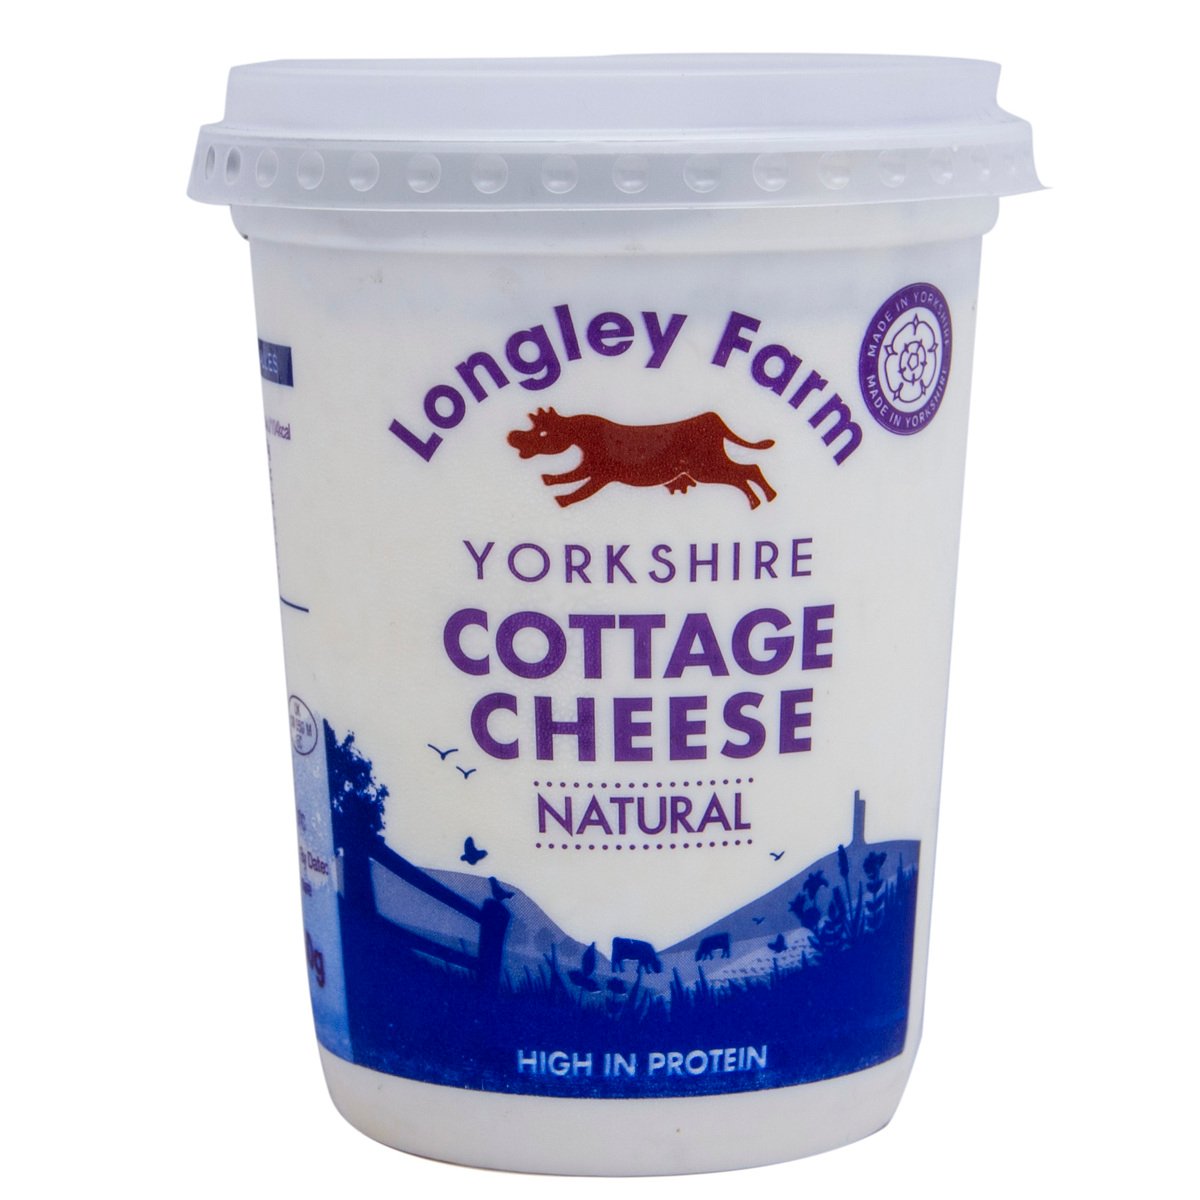 Longley Farm Natural Cottage Cheese 450 g